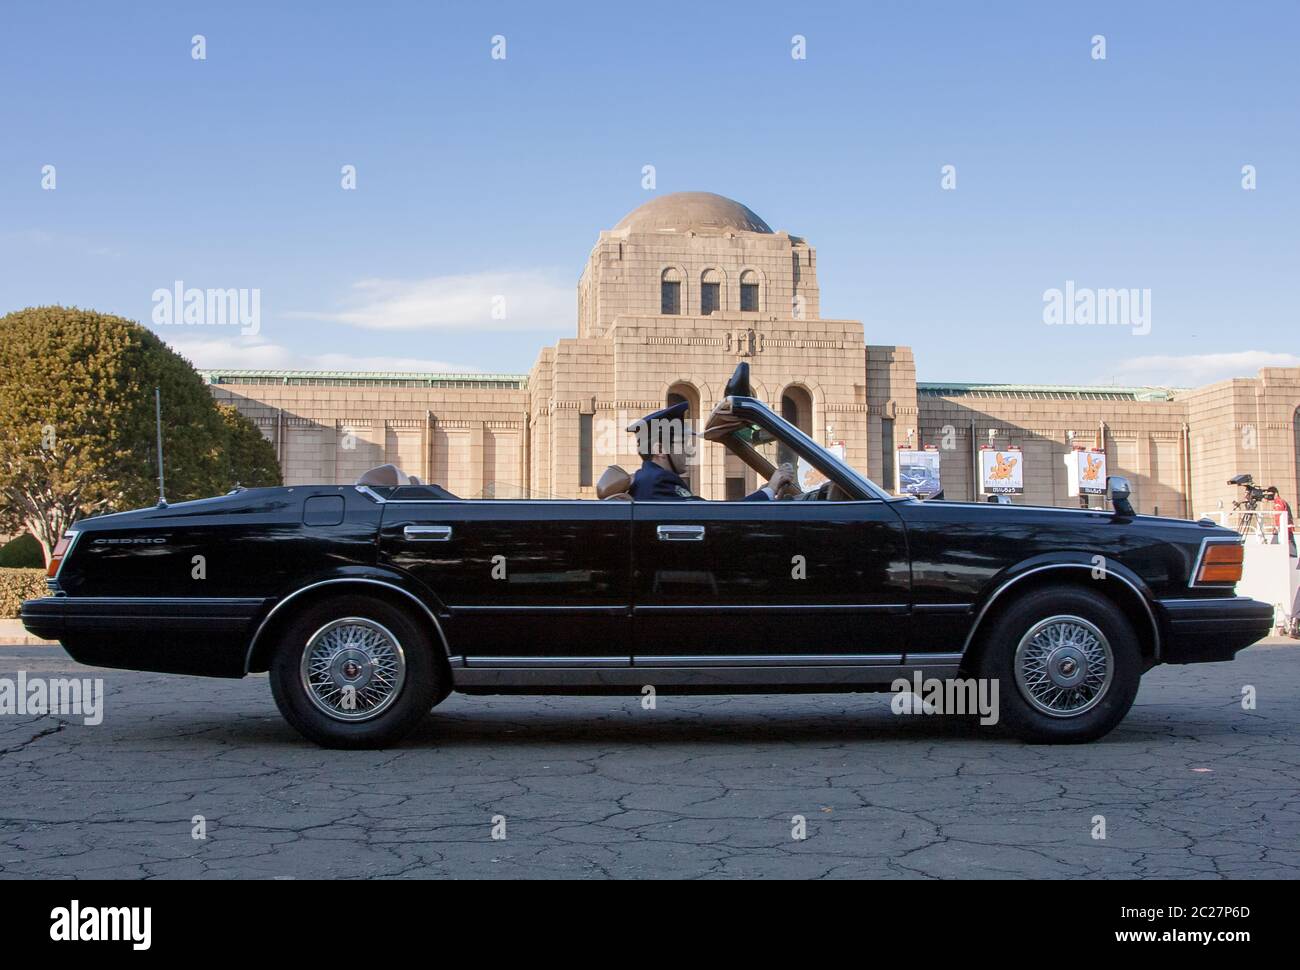 An old convertible Japanese police car or patrol car in front the Meiji Memorial Picture Gallery in Shibuya, Tokyo, Japan. Stock Photo